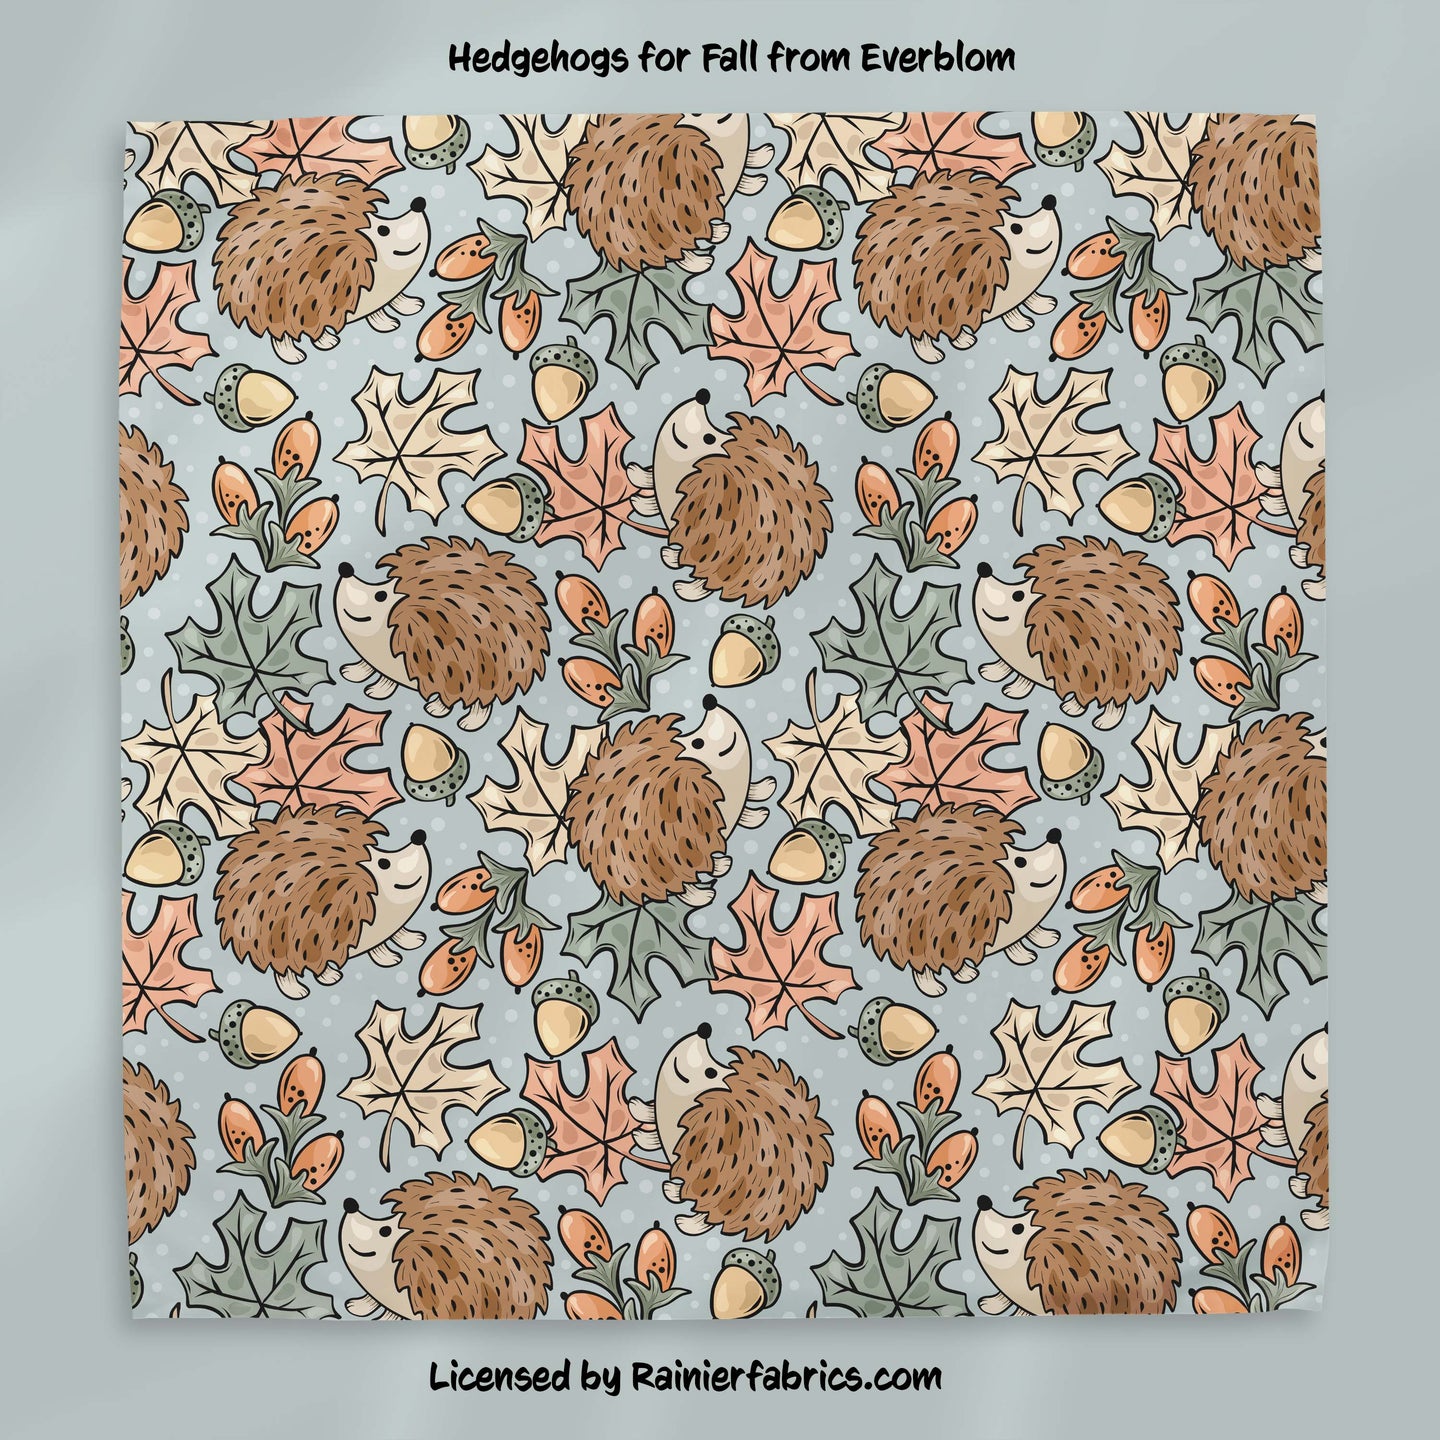 Hedgehogs ready for Fall by Everbloom - 2-5 day TAT - Order by 1/2 yard; Blankets and towels available too